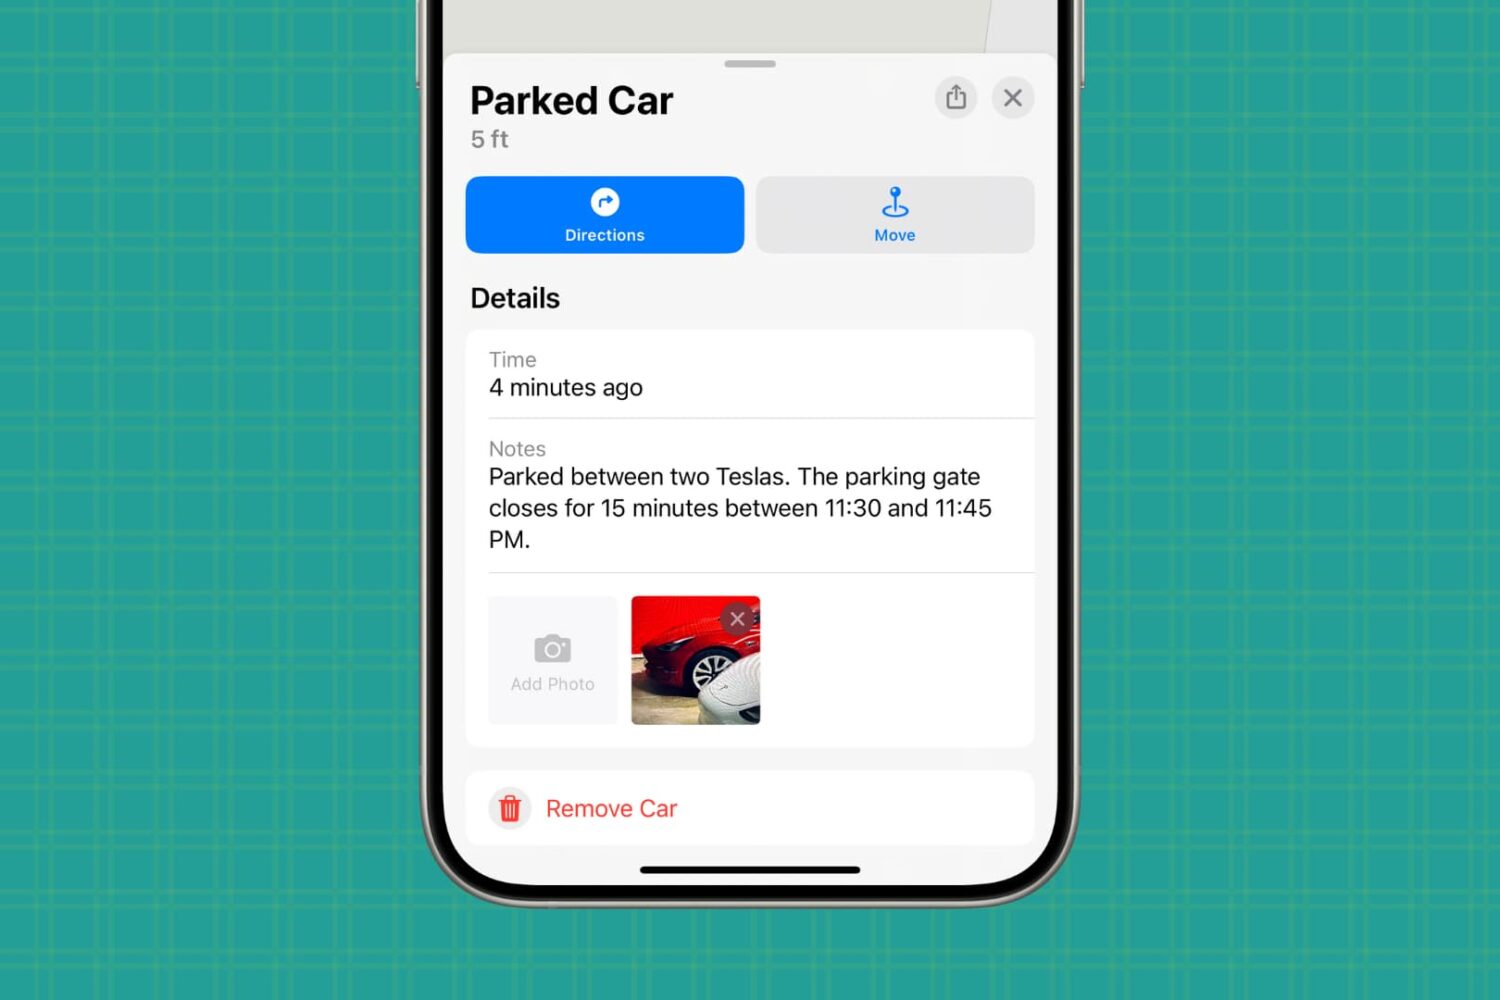 Parked car information on iPhone